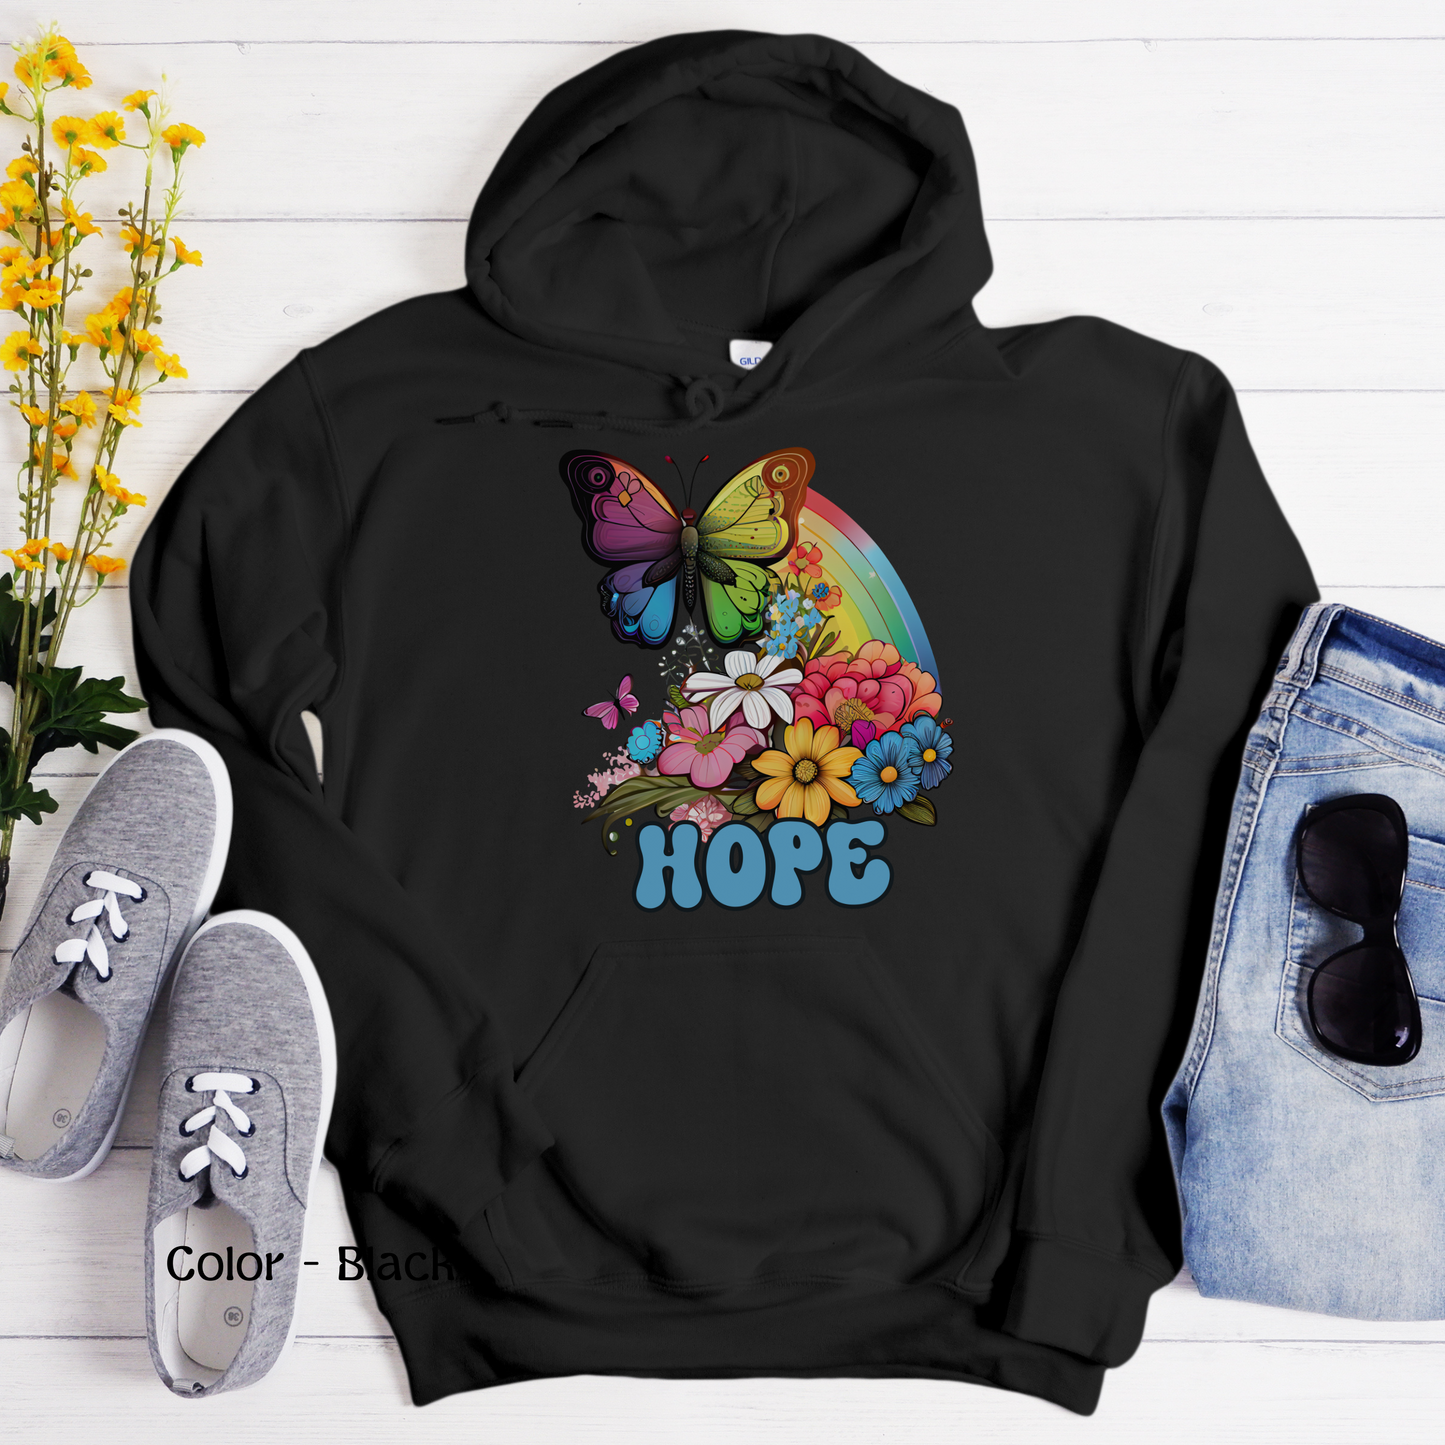 Retro Butterfly Sweatshirt Gift For Her Butterfly Hoodie Gift For Daughter Colorful Butterfly Hope Women Rainbow Sweatshirt Gift For Friend